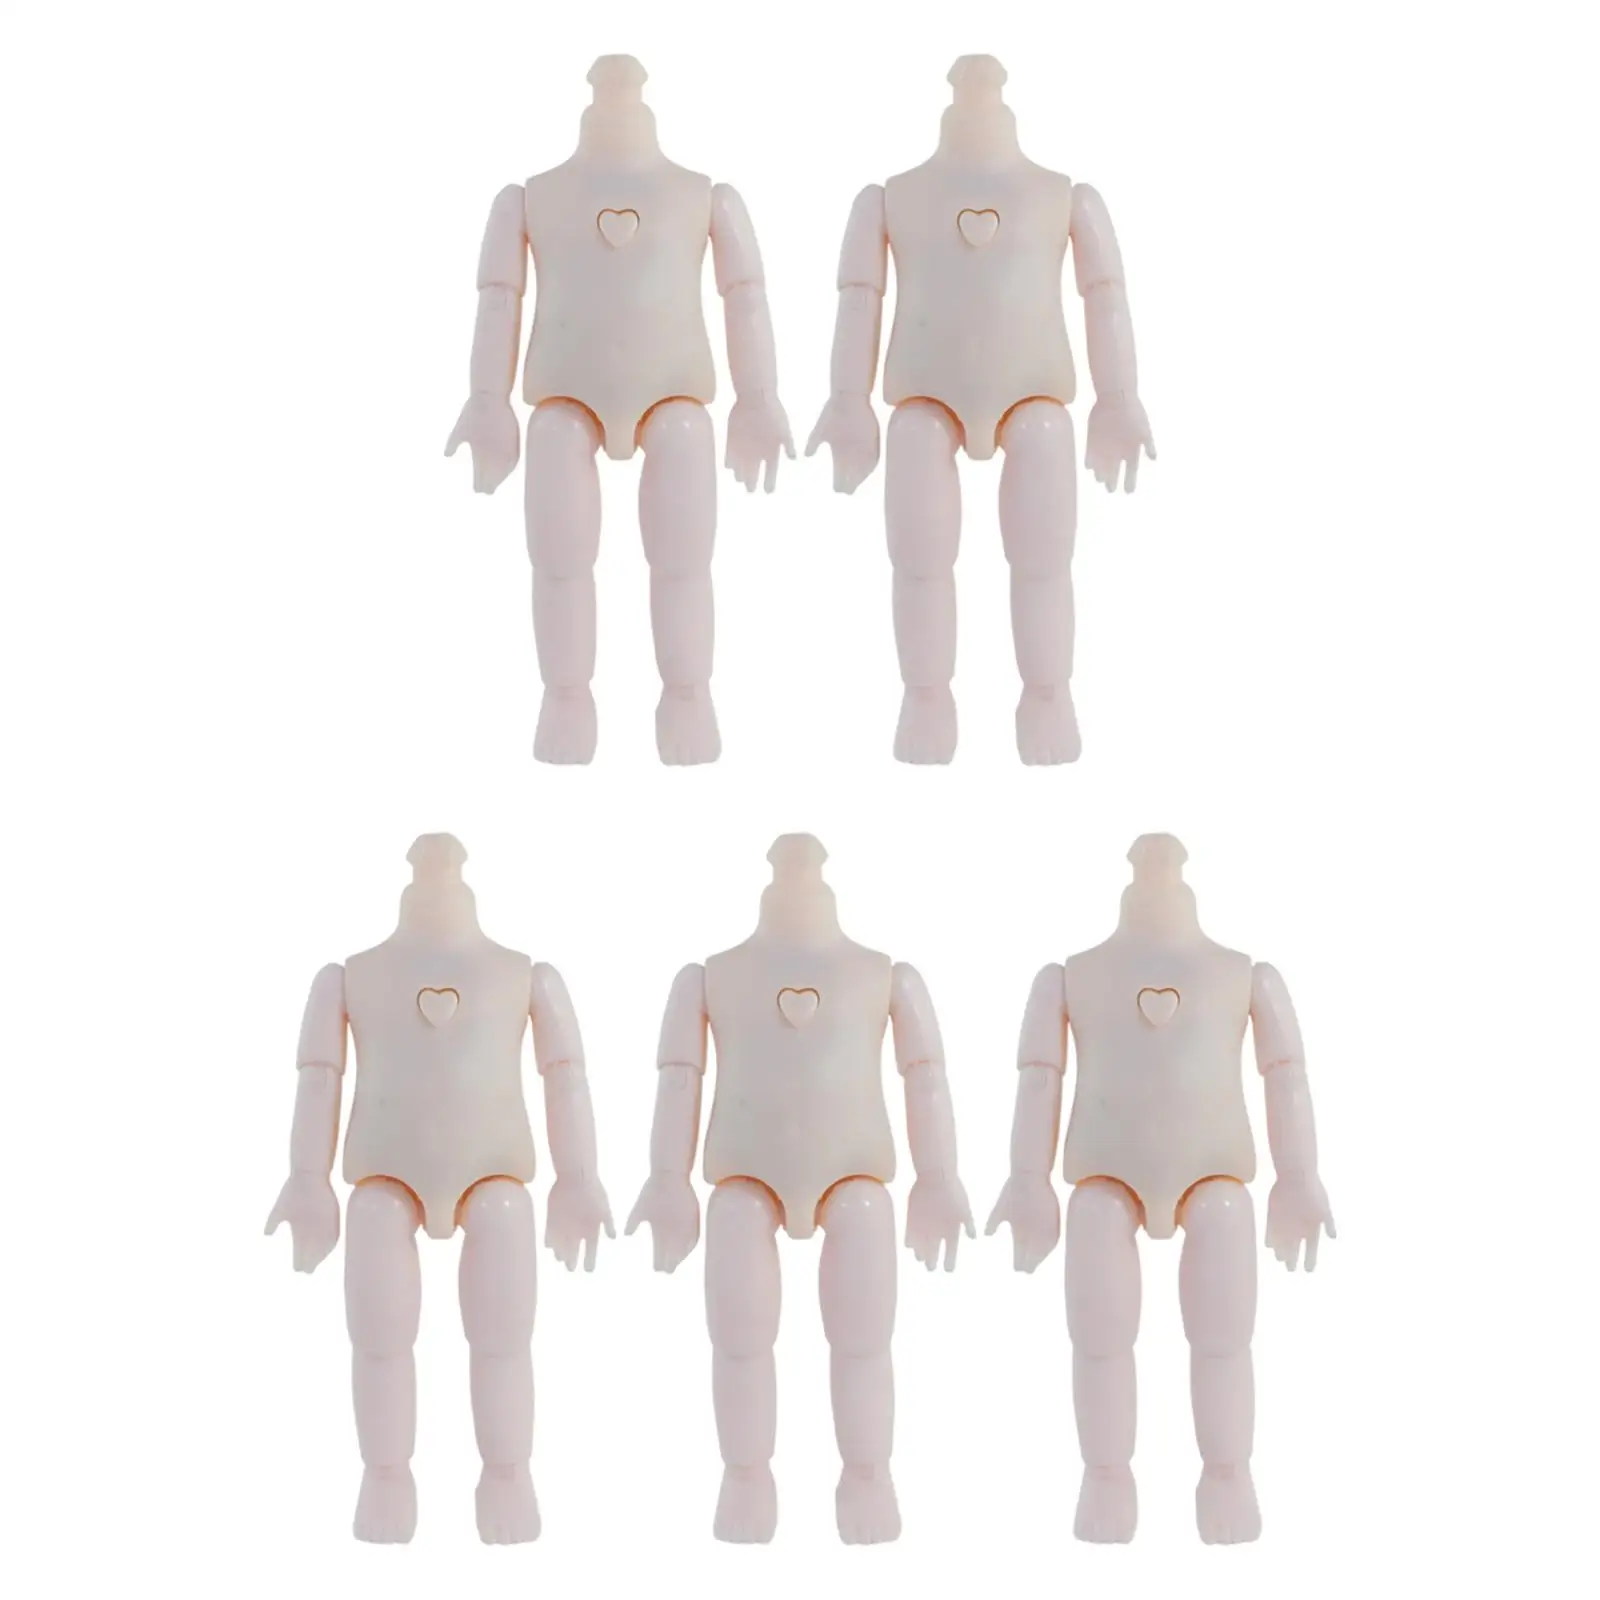 5Pcs Doll Nude Body Height 16cm Moveable Jointed Premium Material DIY Making Accessories with Spare Hands No Head White Color